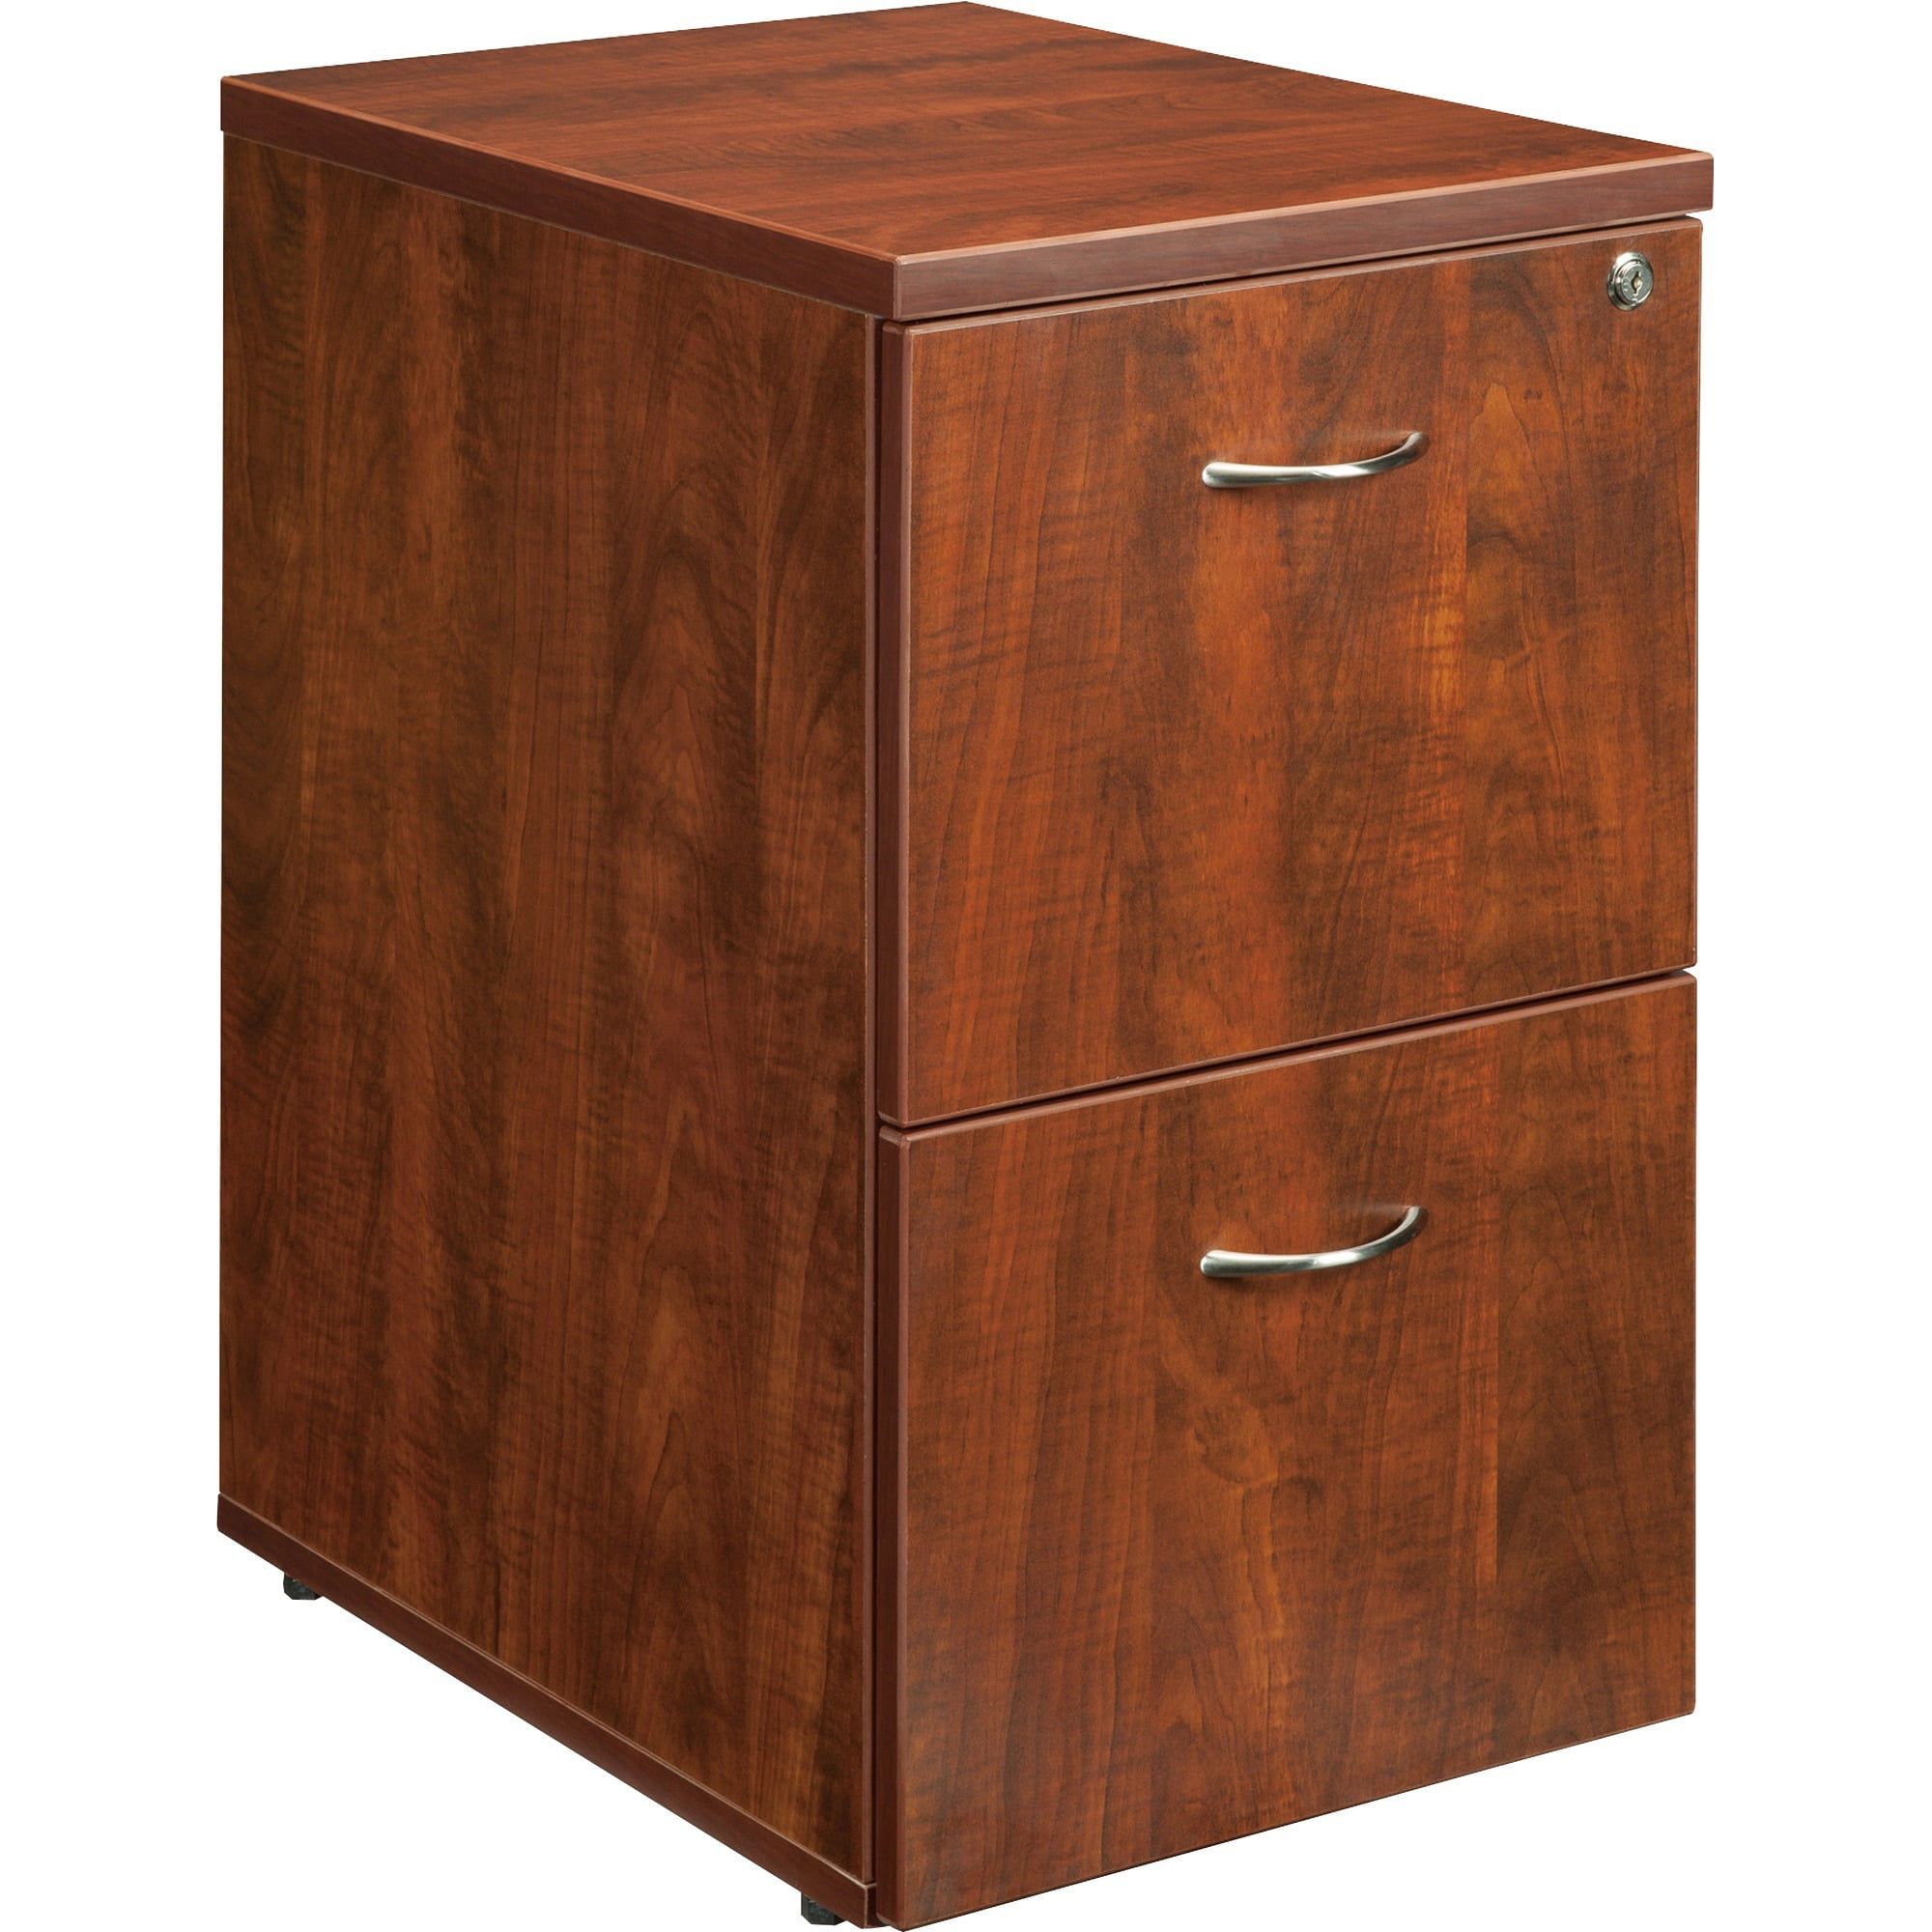 2 Drawers Vertical Wood Composite Lockable Filing Cabinet, Cherry Regarding Wood Cabinet With Drawers (Gallery 2 of 20)